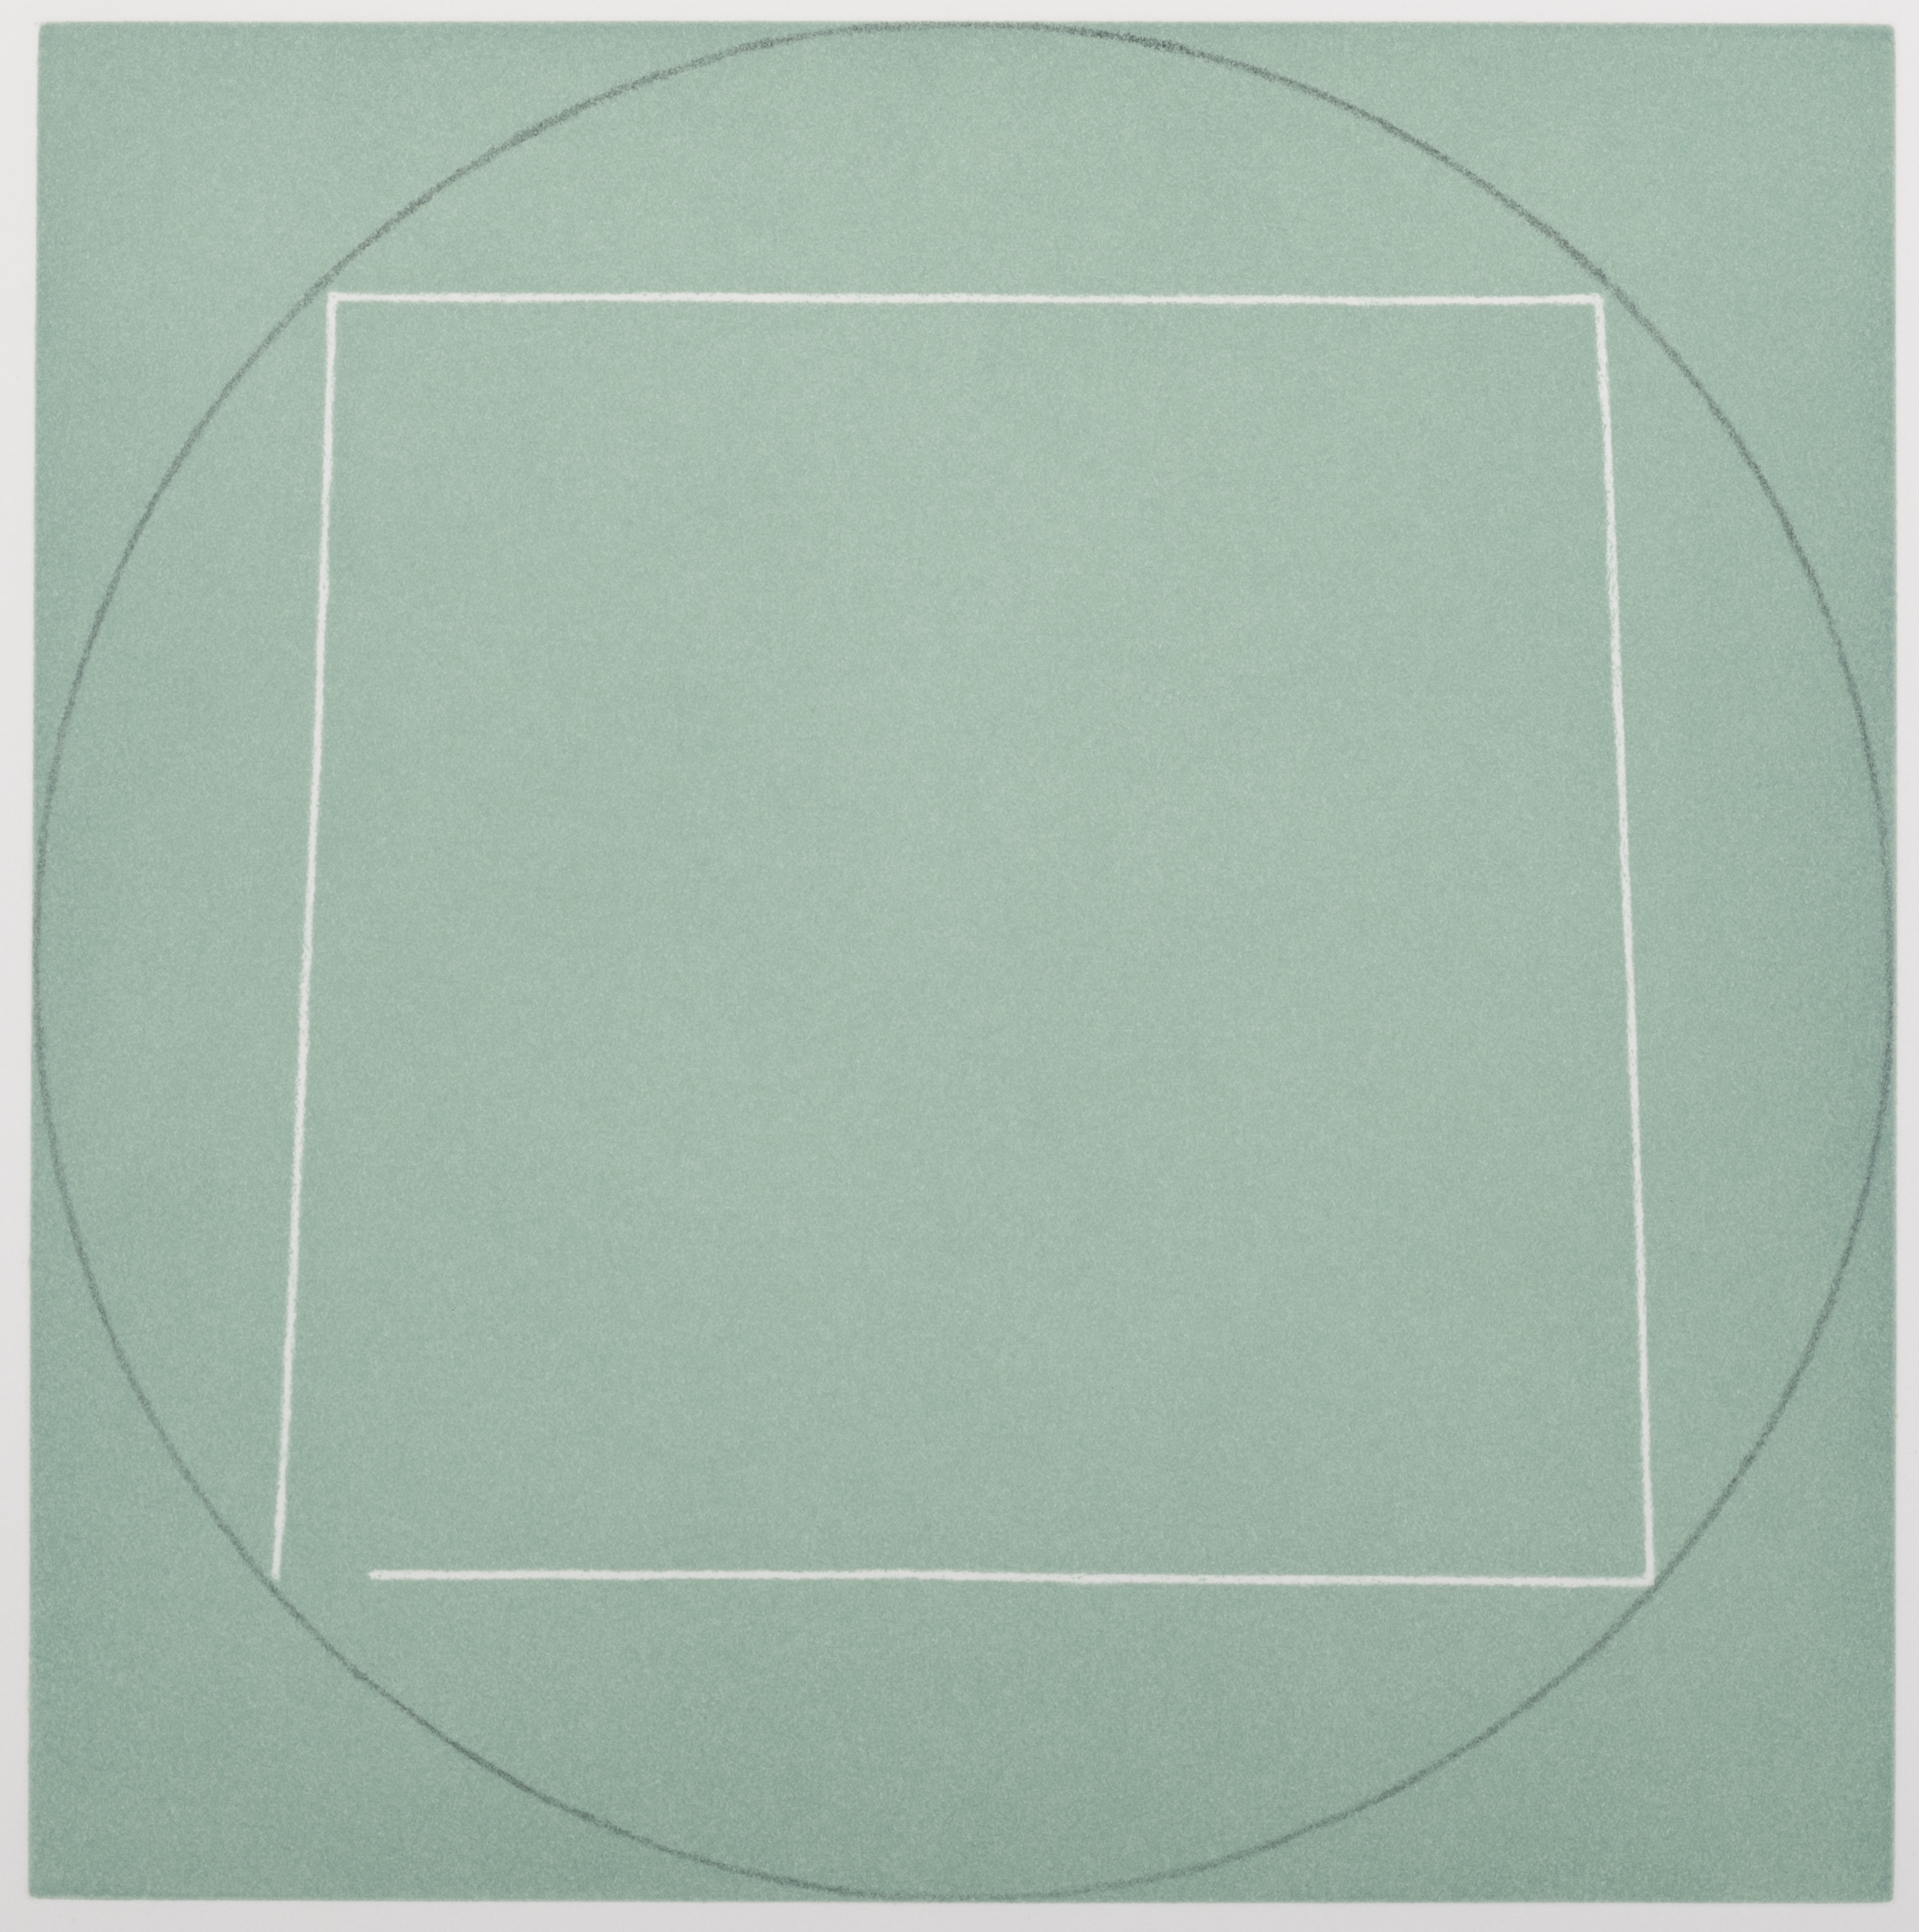 Untitled (green, square within circle)